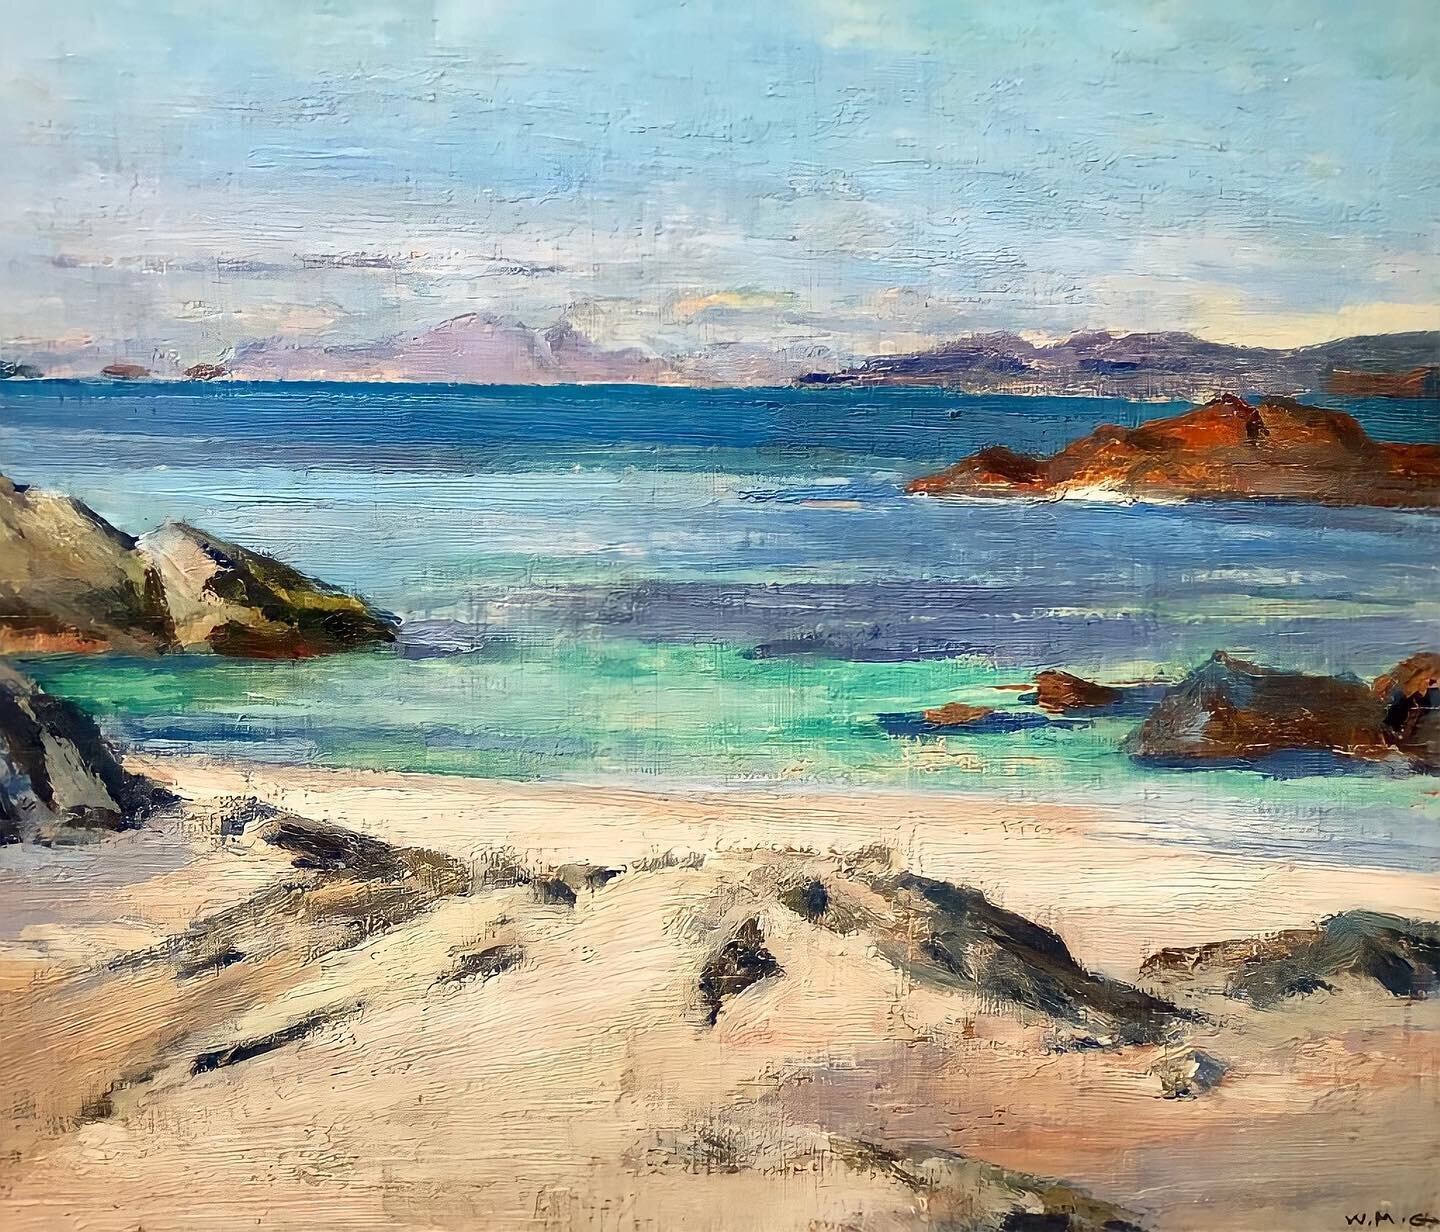 We are looking forward to launching our next exhibition in the coming weeks, which features the stunning &lsquo;Iona&rsquo; by William M. Glass (1885-1965). Visit fettesfineart.com for more information and join our mailing list to keep up to date on 